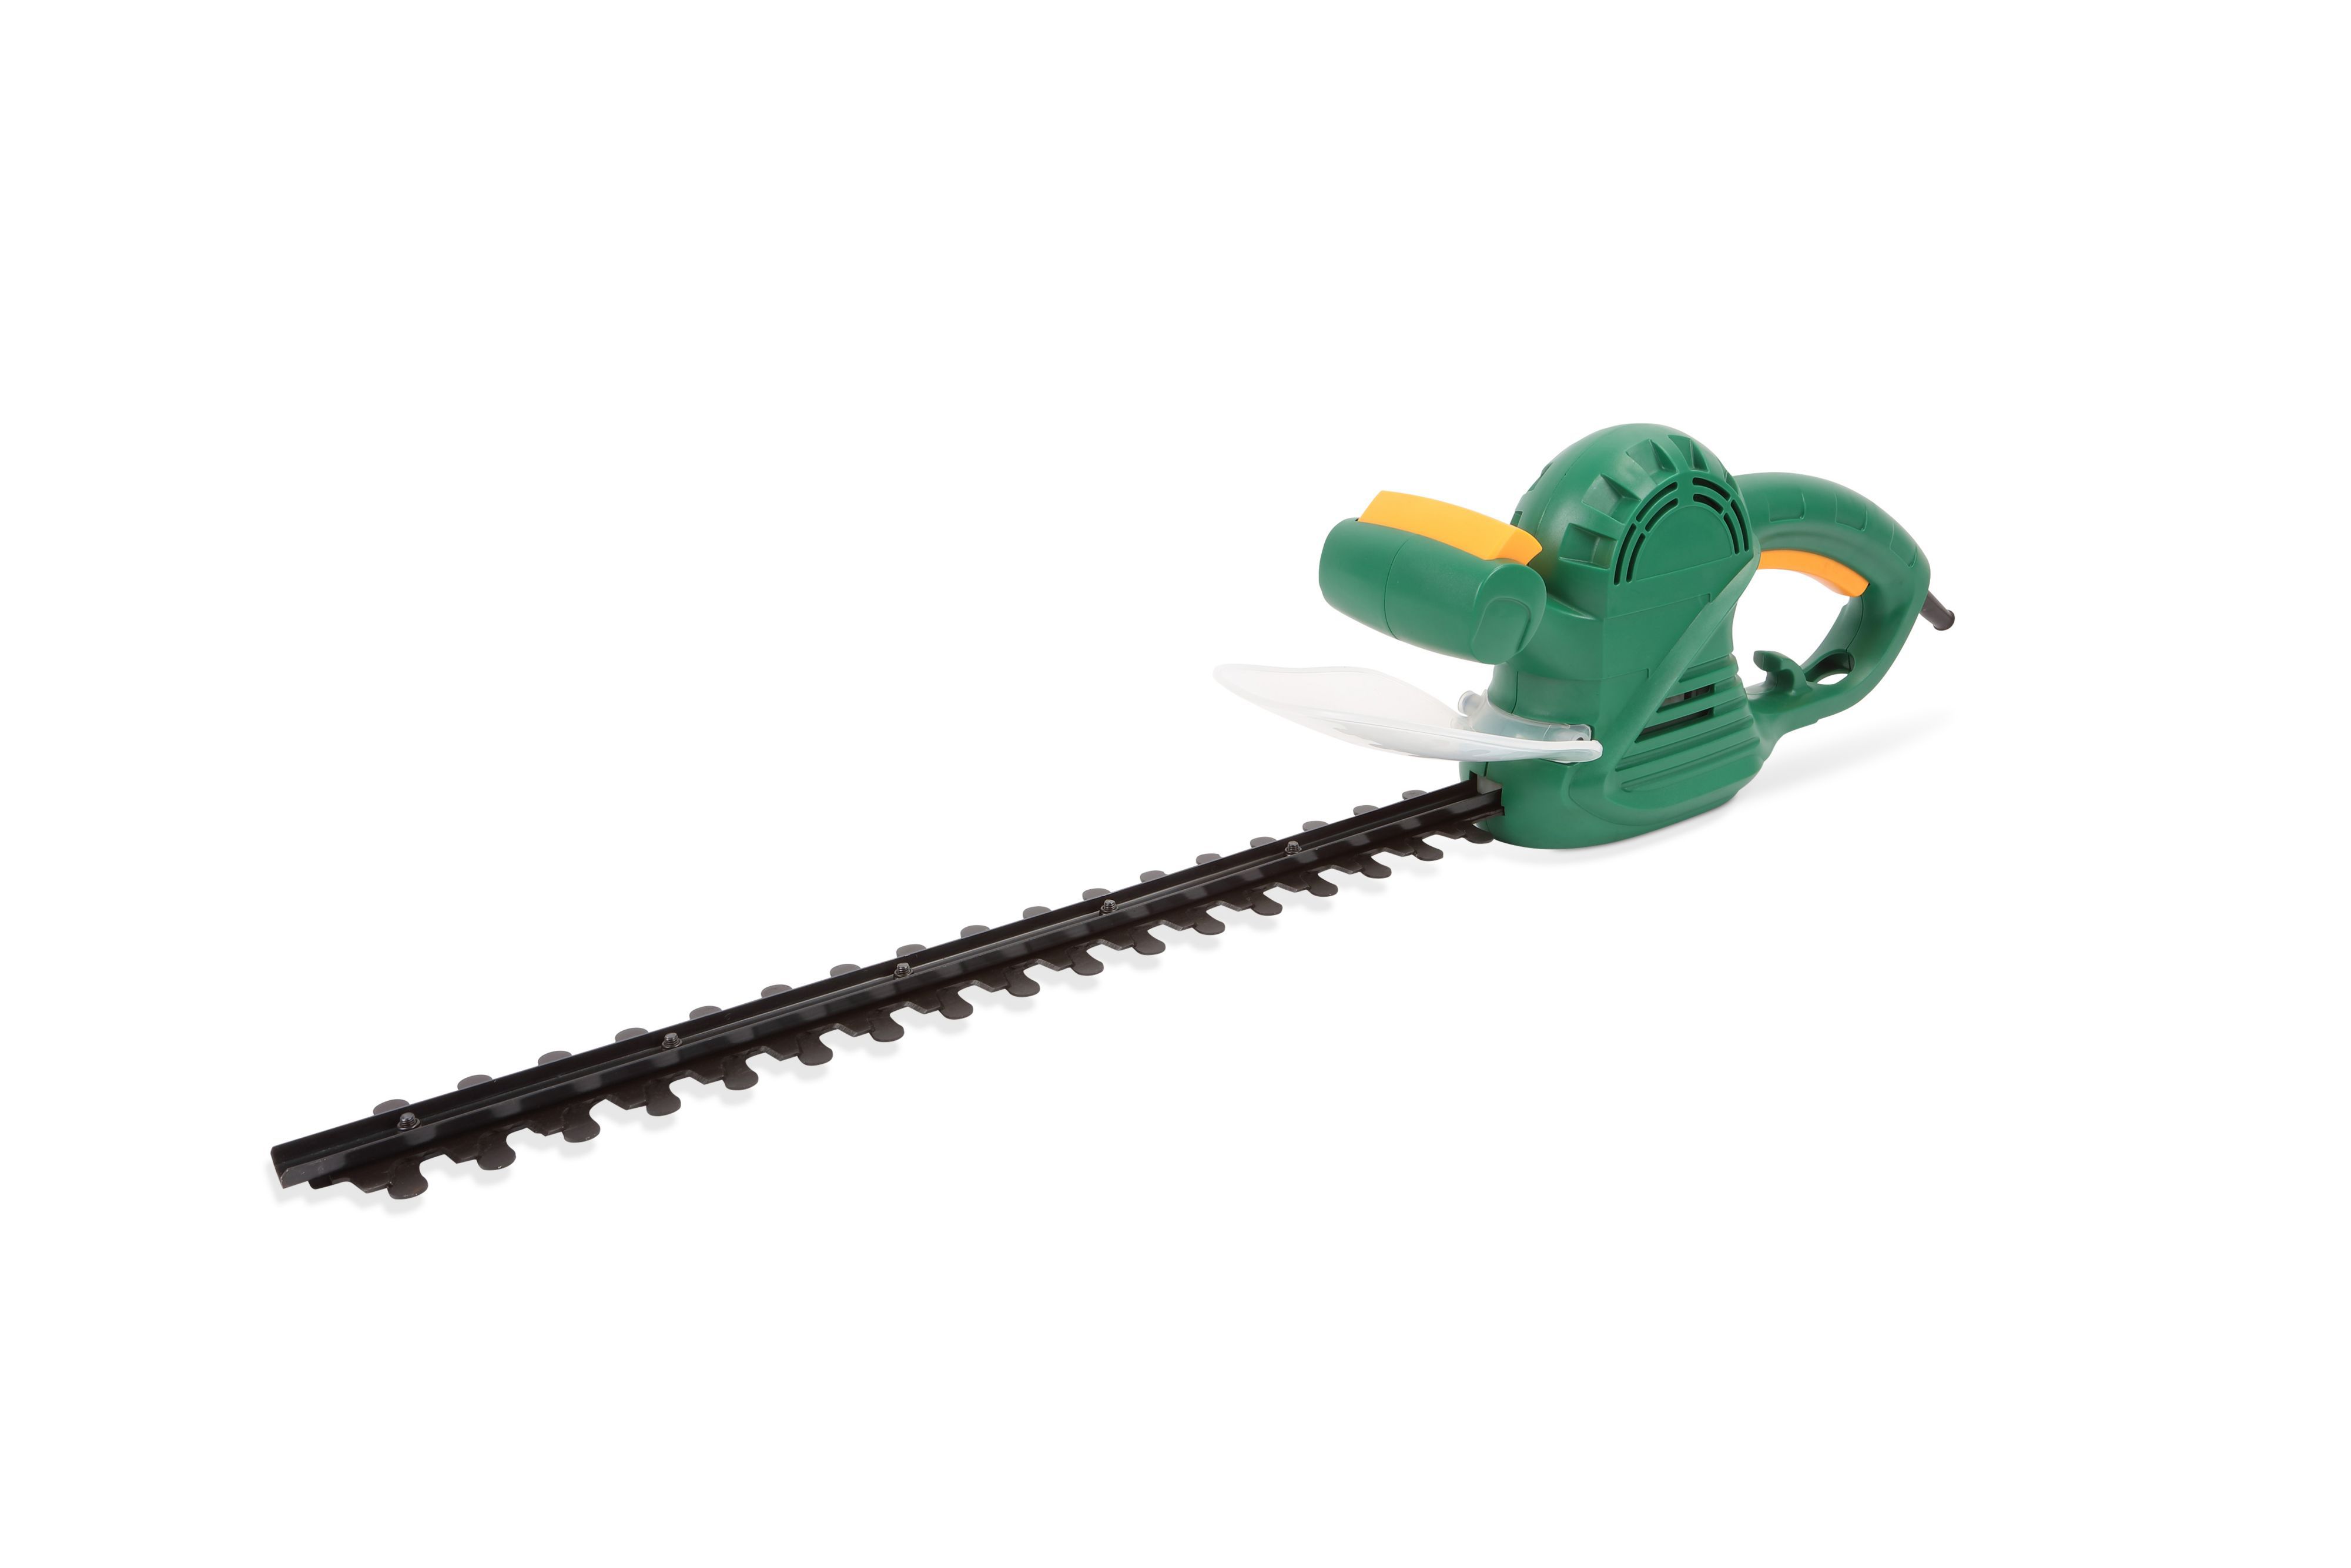 B&Q FPHT500 500W 460mm Corded Hedge trimmer